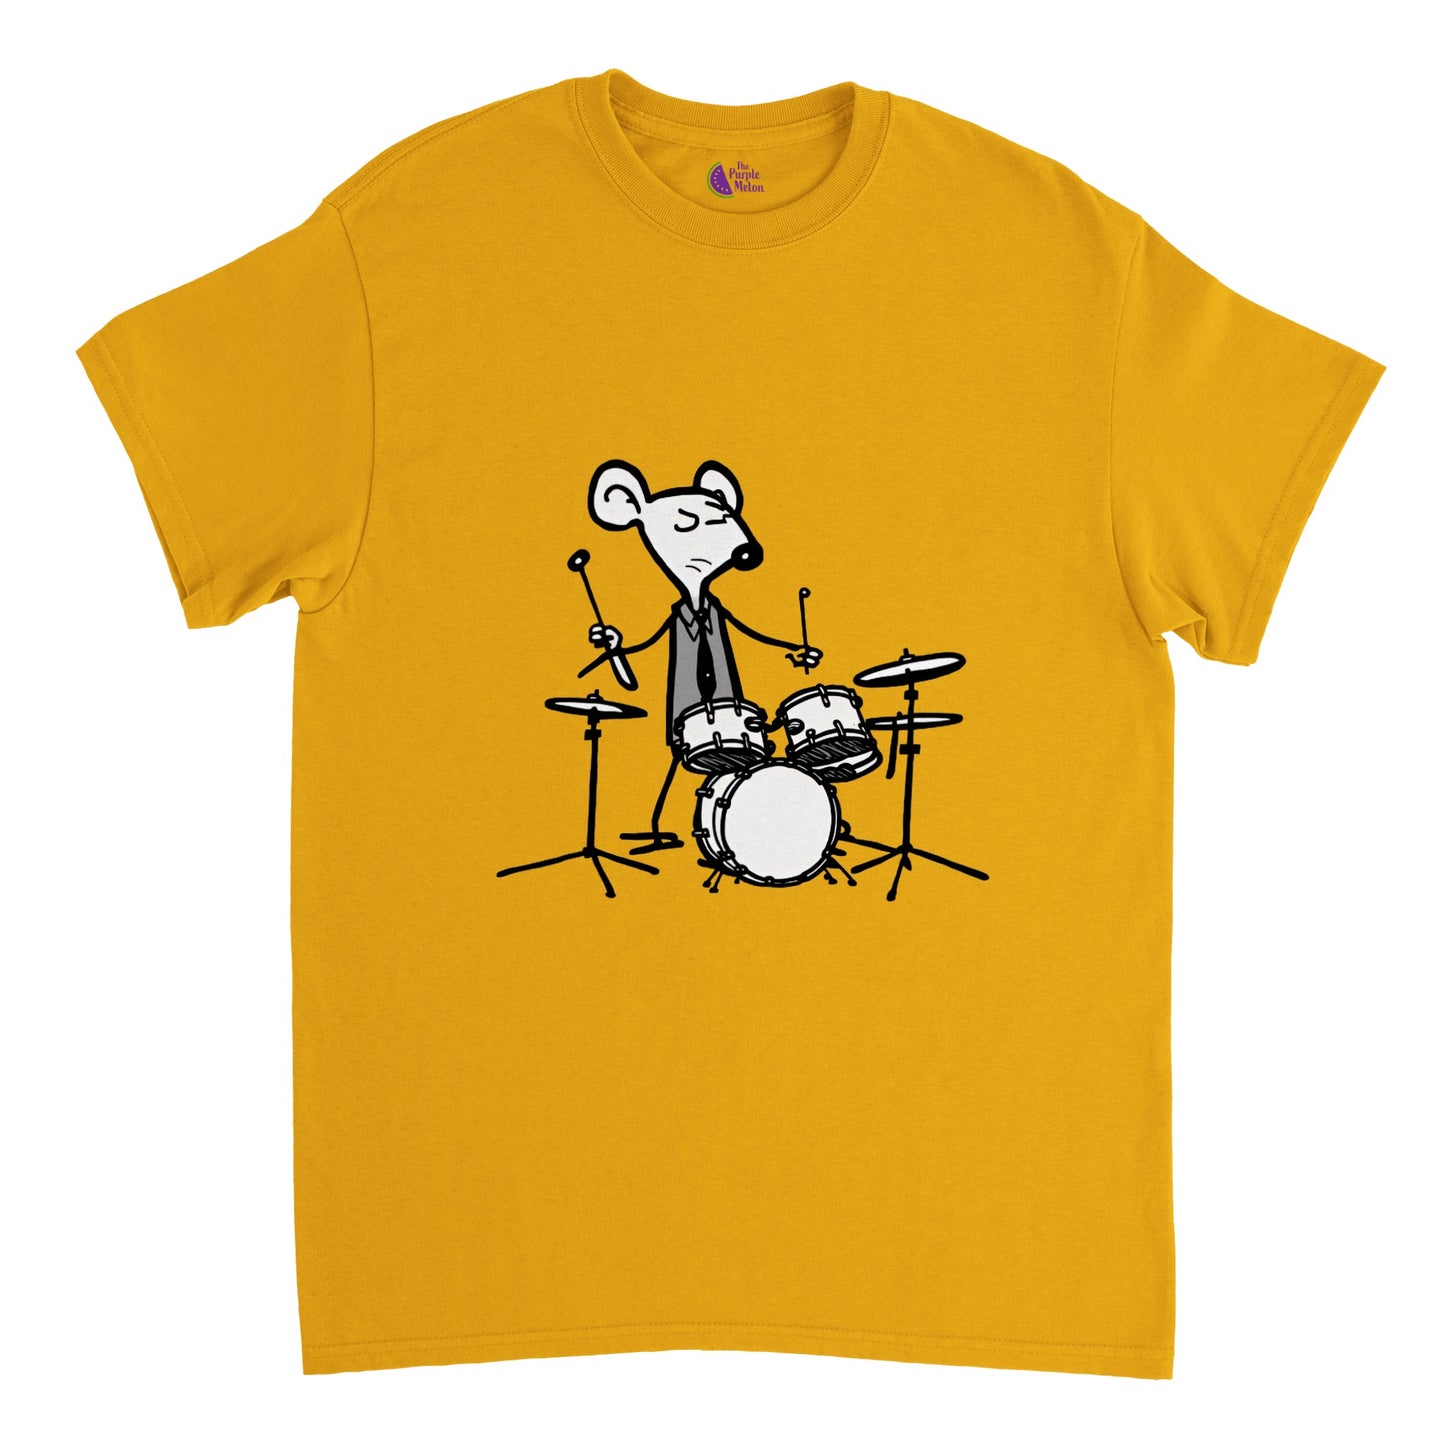 Drumming Mouse Heavyweight Unisex Crewneck T-Shirt: Express Your Musical Passion!